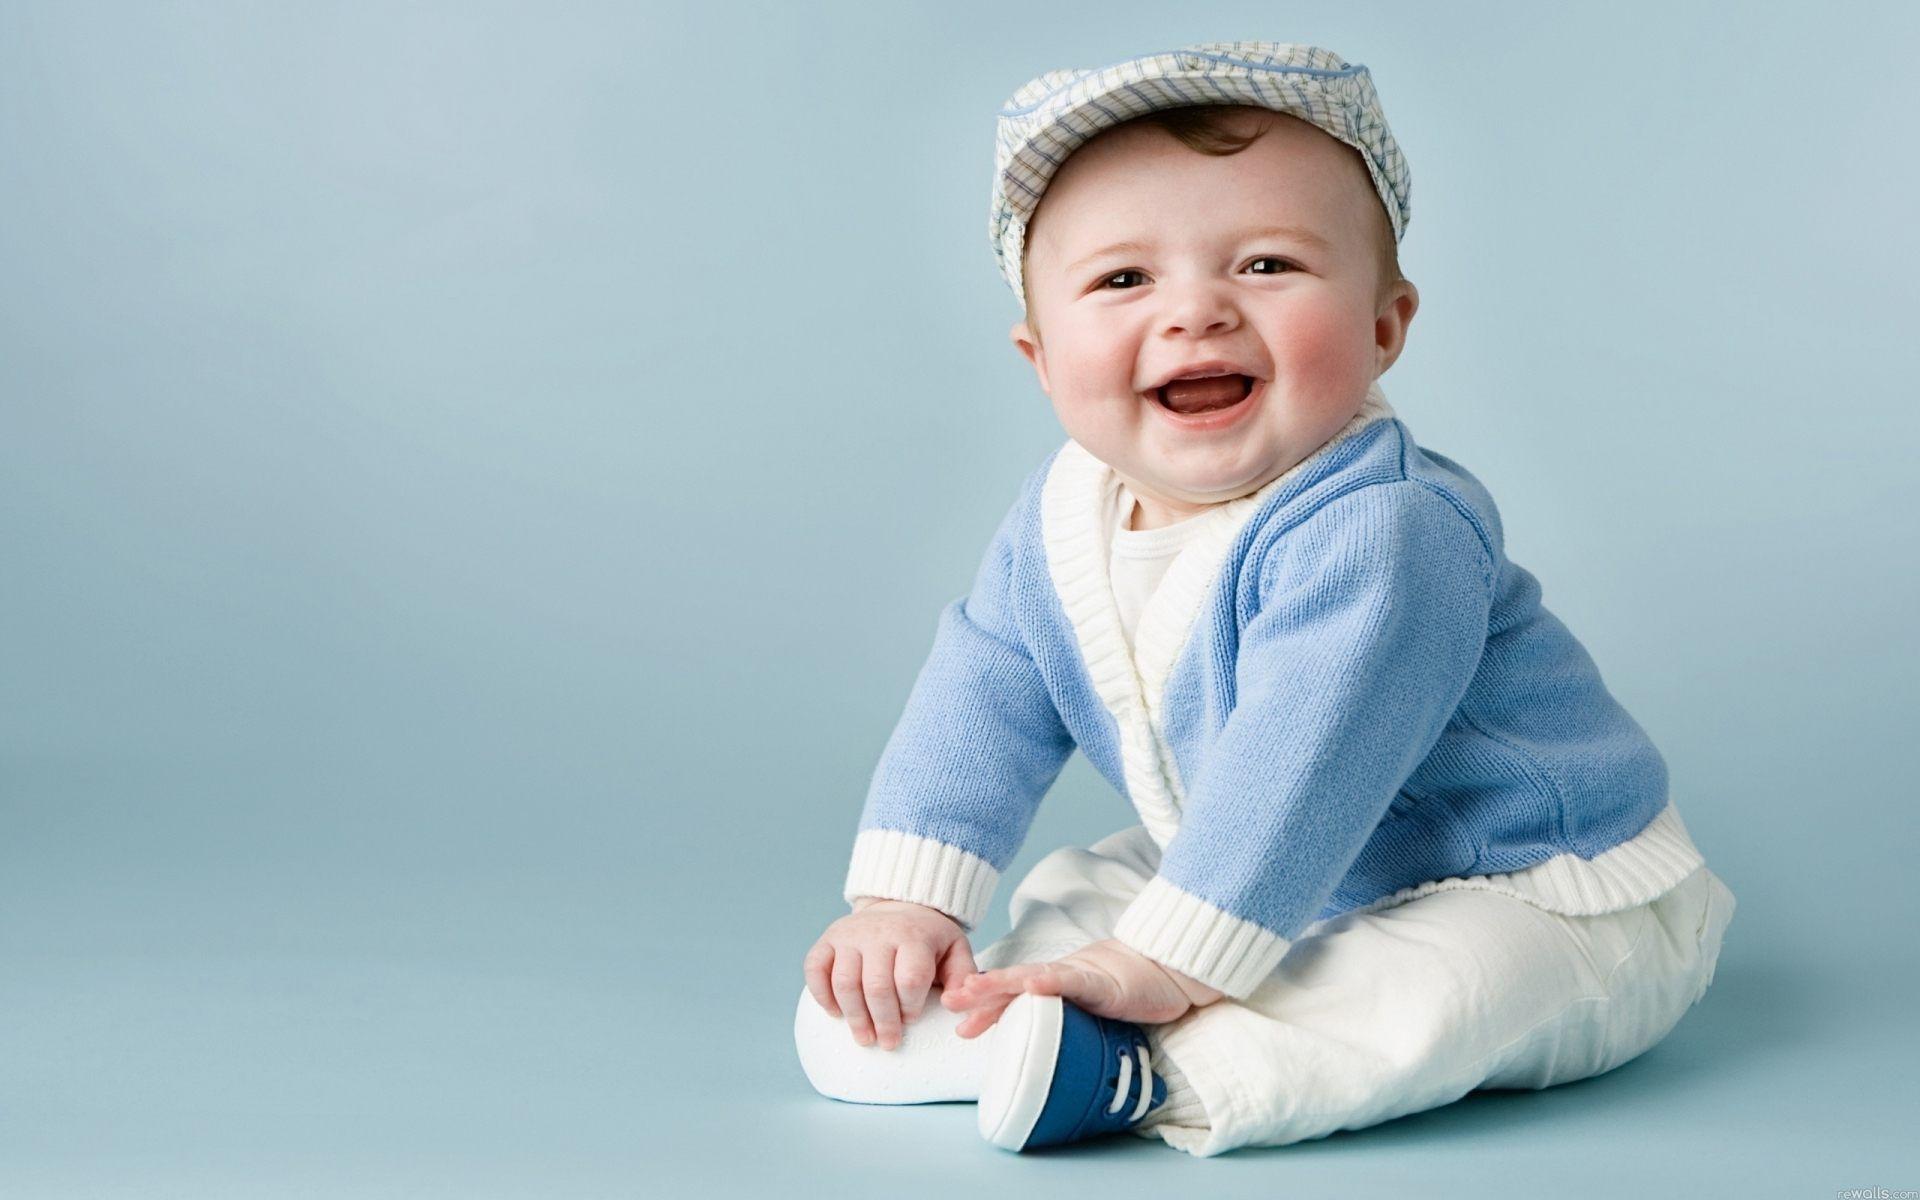 Awesome Cute Baby Boy With Smiling HD Image Desktop Of Computer